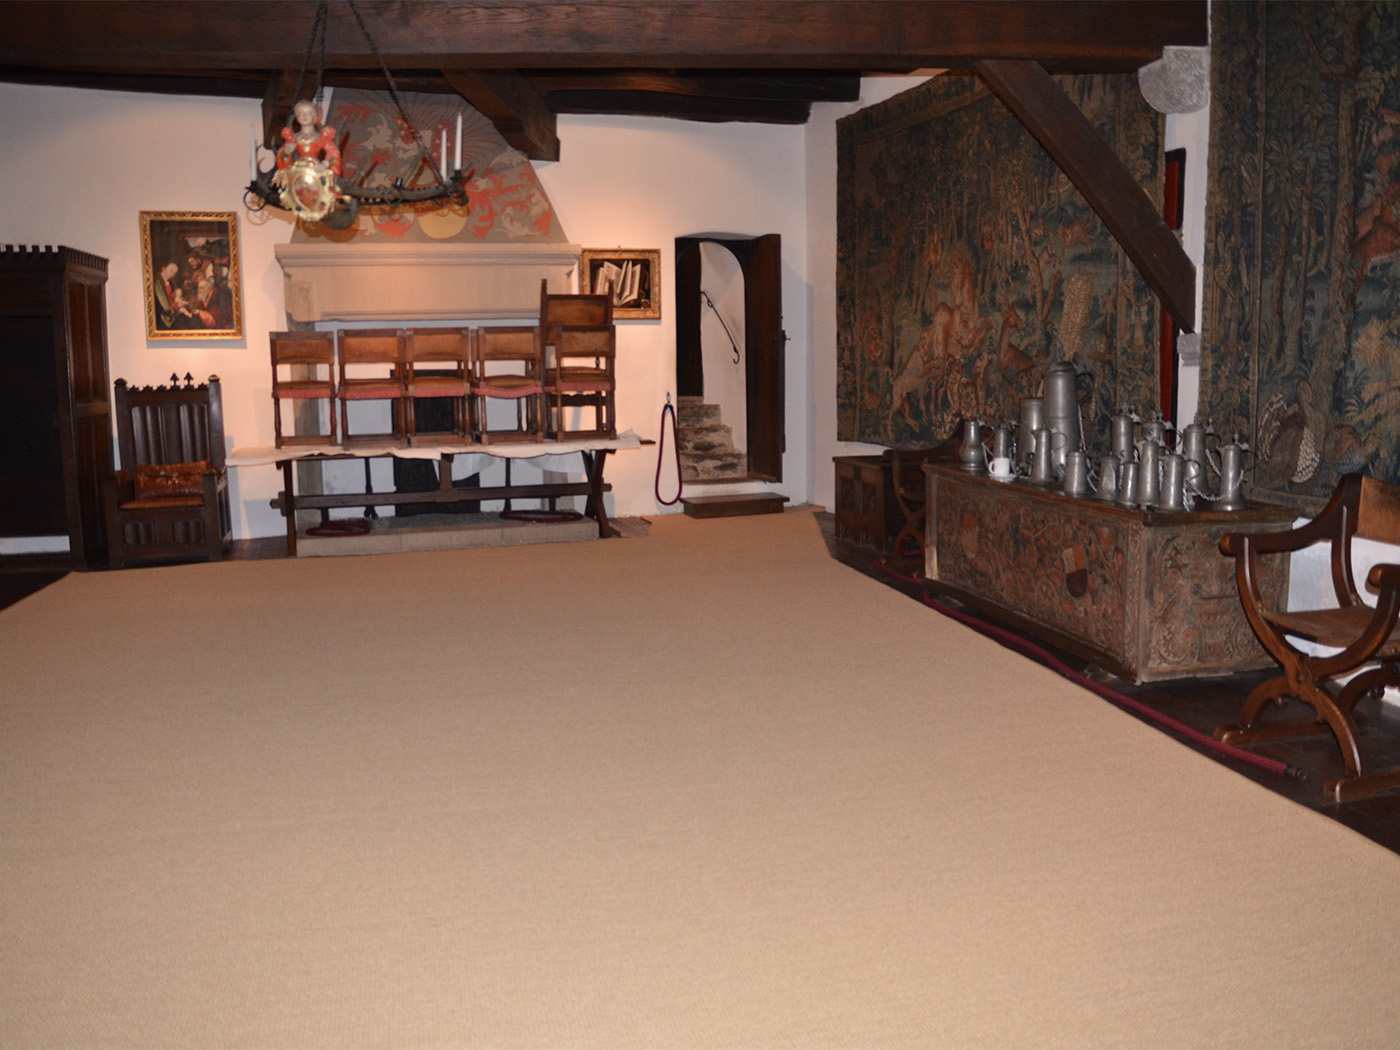 Photo of a fireplace room in Eltz Castle with a large coconut carpet.